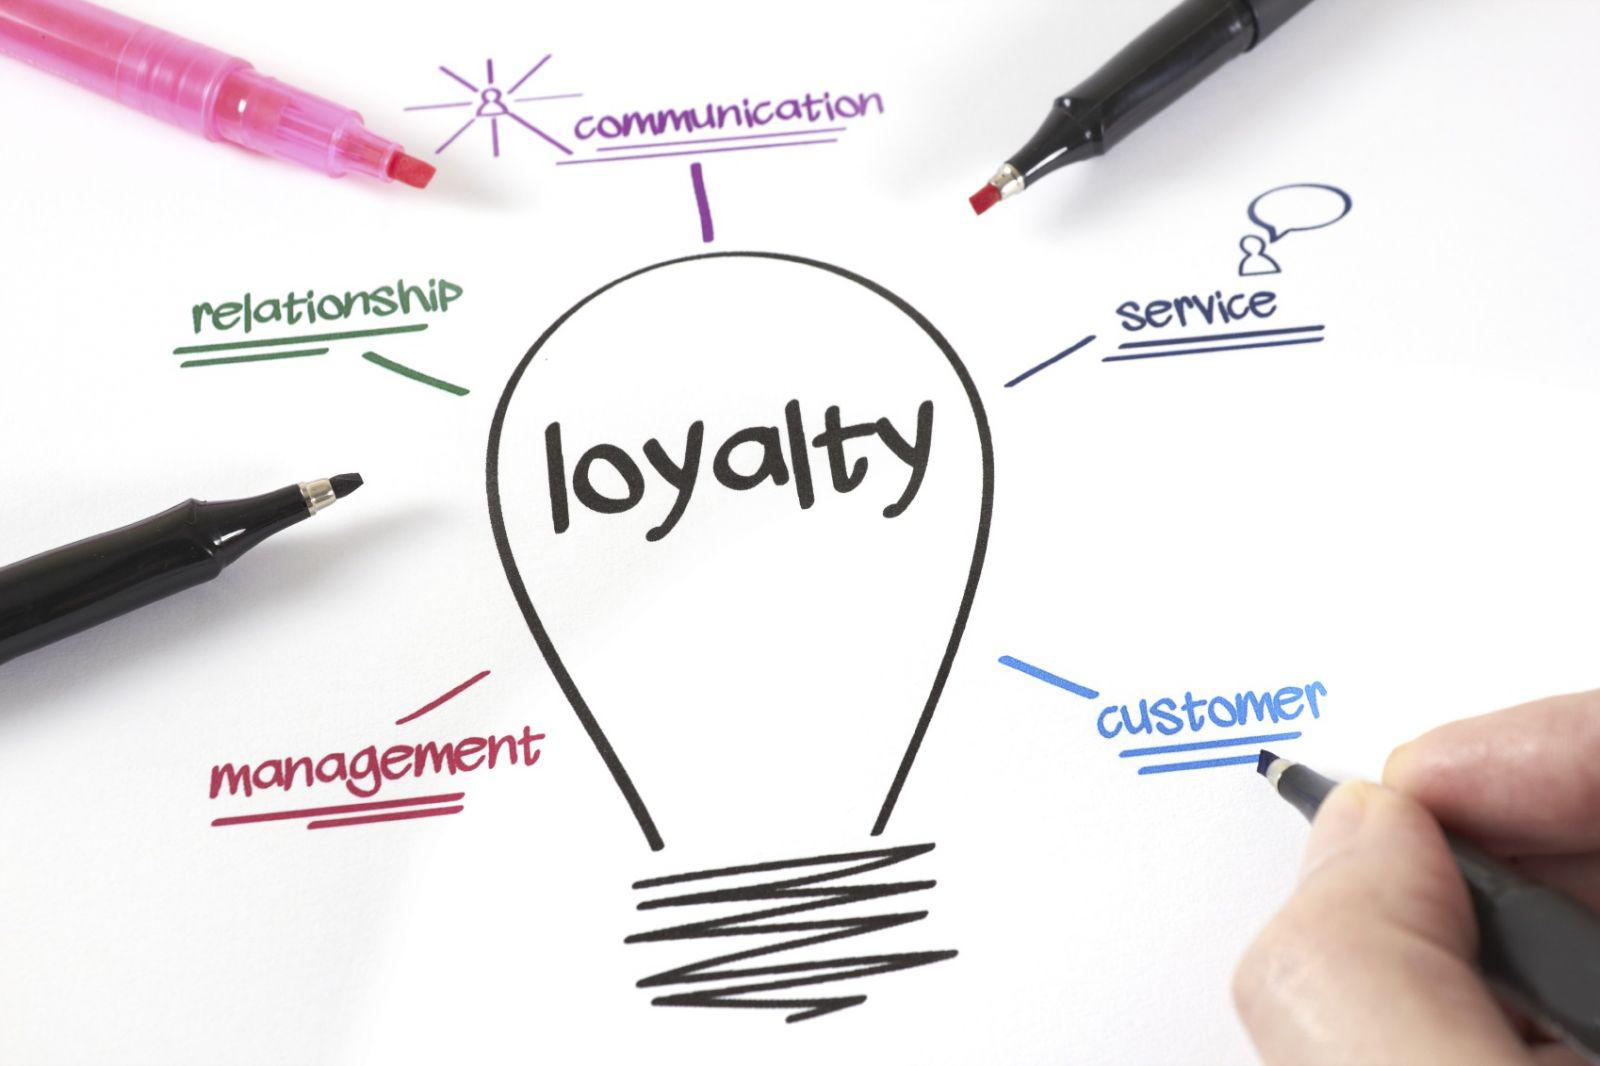 How to encourage loyalty from clients